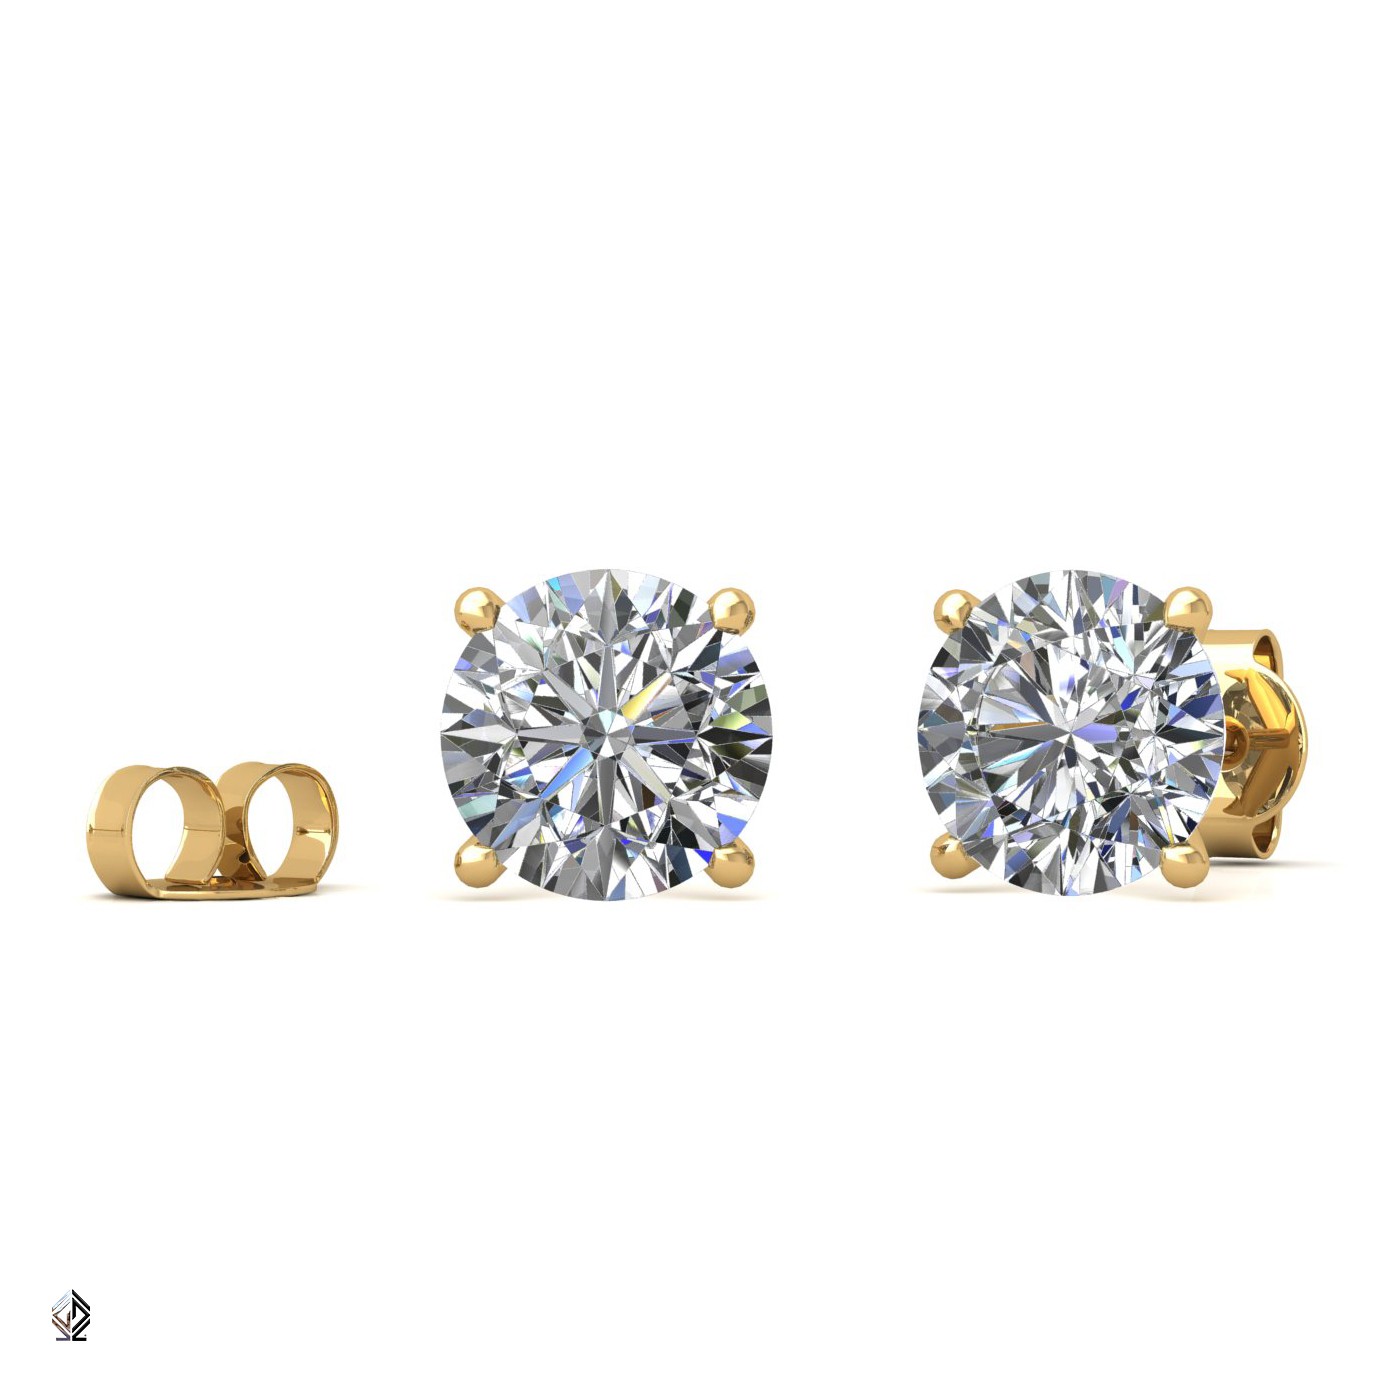 18k yellow gold 0,7 ct each (1,4 tcw) 4 prongs round cut classic diamond earring studs Photos & images